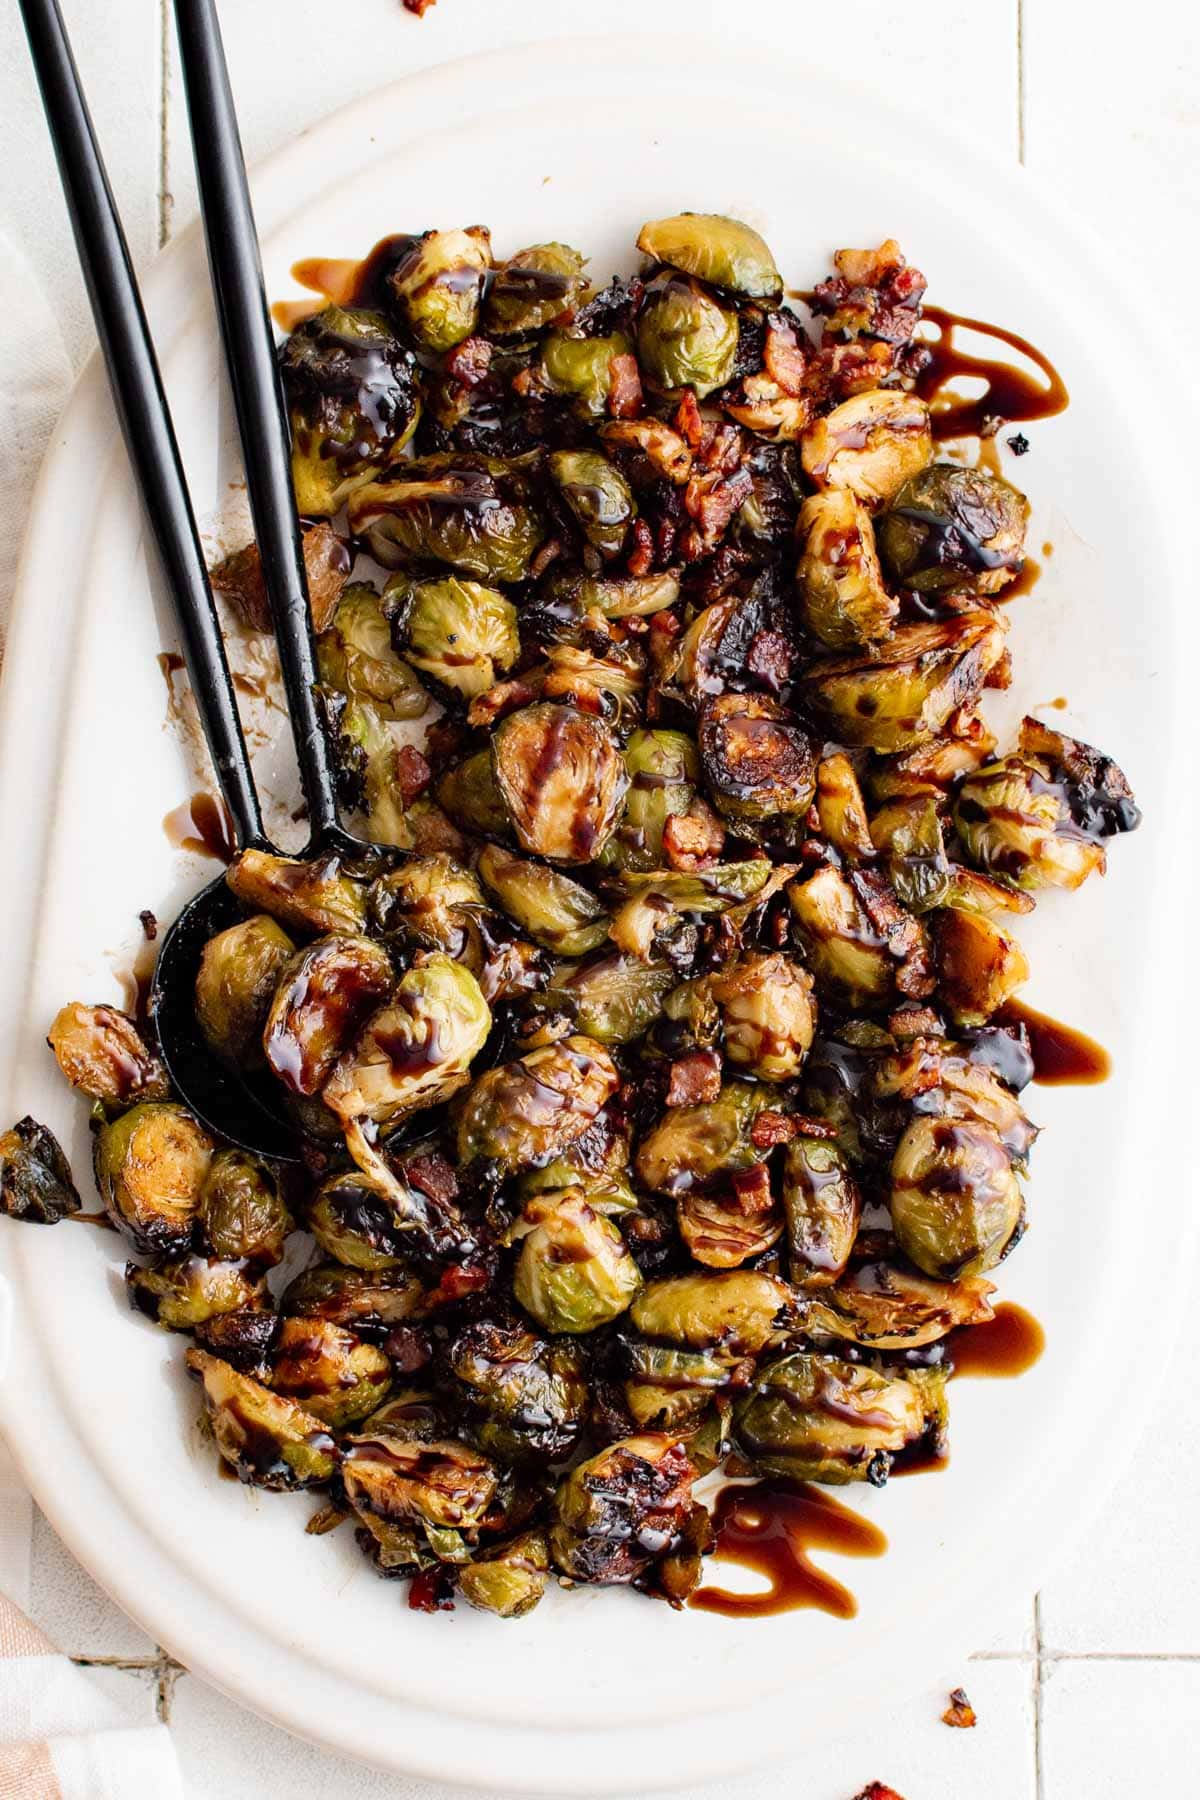 Large platter with balsamic drizzle over roasted brussels sprouts.